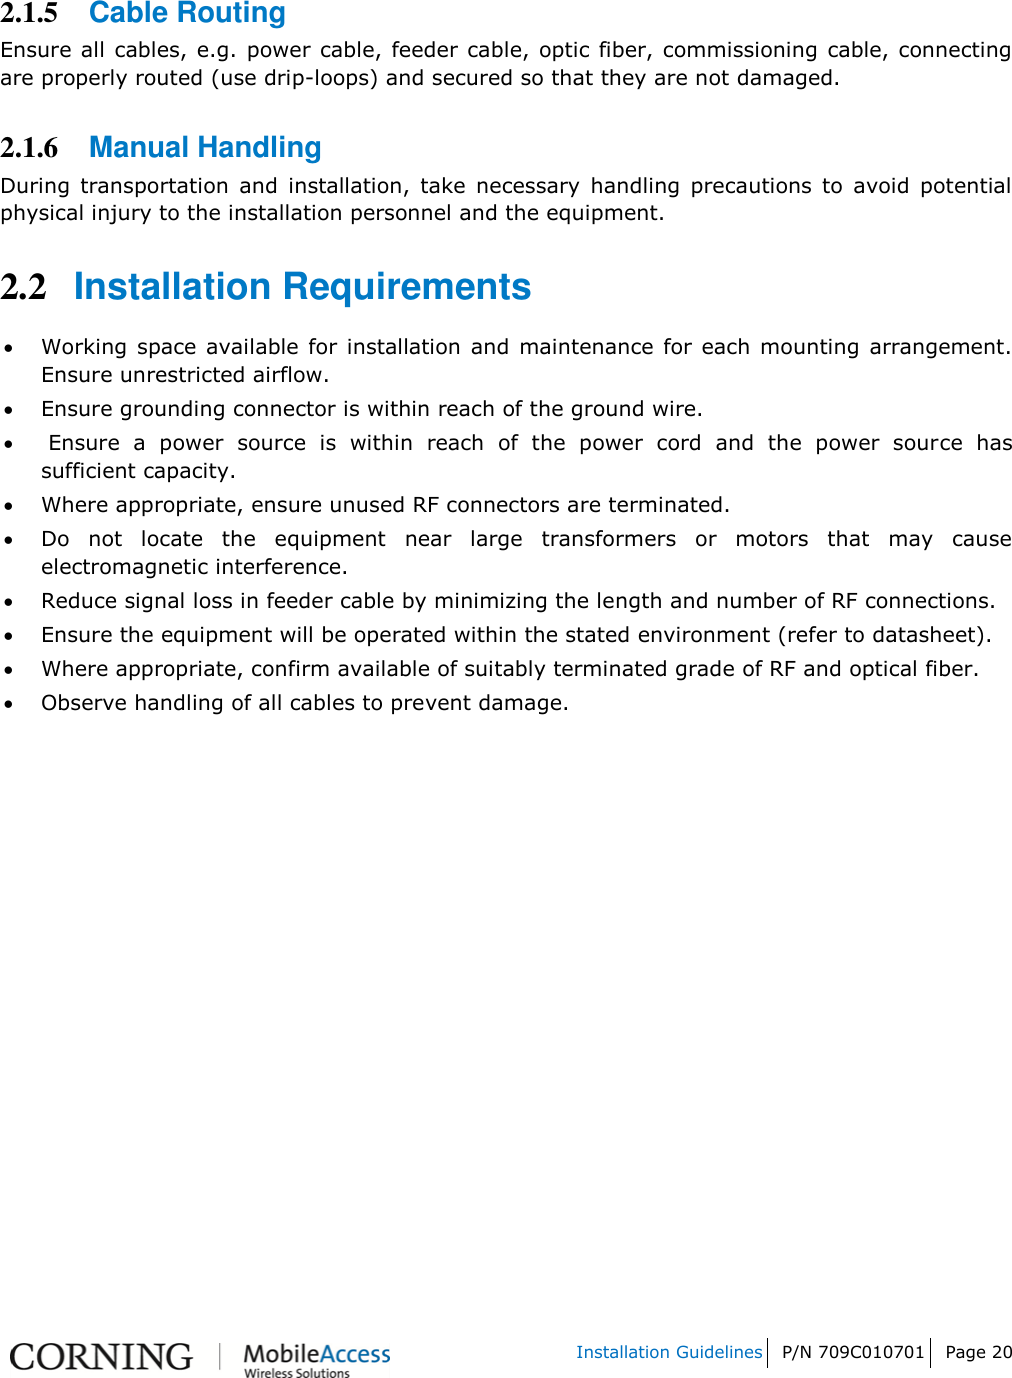   Installation Guidelines P/N 709C010701 Page 20    2.1.5 Cable Routing  Ensure all cables, e.g. power cable, feeder cable, optic fiber, commissioning cable, connecting are properly routed (use drip-loops) and secured so that they are not damaged.  2.1.6 Manual Handling  During  transportation  and  installation,  take  necessary  handling  precautions  to  avoid  potential physical injury to the installation personnel and the equipment. 2.2 Installation Requirements  Working  space available  for installation  and  maintenance for  each  mounting arrangement. Ensure unrestricted airflow.   Ensure grounding connector is within reach of the ground wire.    Ensure  a  power  source  is  within  reach  of  the  power  cord  and  the  power  source  has sufficient capacity.   Where appropriate, ensure unused RF connectors are terminated.   Do  not  locate  the  equipment  near  large  transformers  or  motors  that  may  cause electromagnetic interference.   Reduce signal loss in feeder cable by minimizing the length and number of RF connections.   Ensure the equipment will be operated within the stated environment (refer to datasheet).   Where appropriate, confirm available of suitably terminated grade of RF and optical fiber.   Observe handling of all cables to prevent damage.    